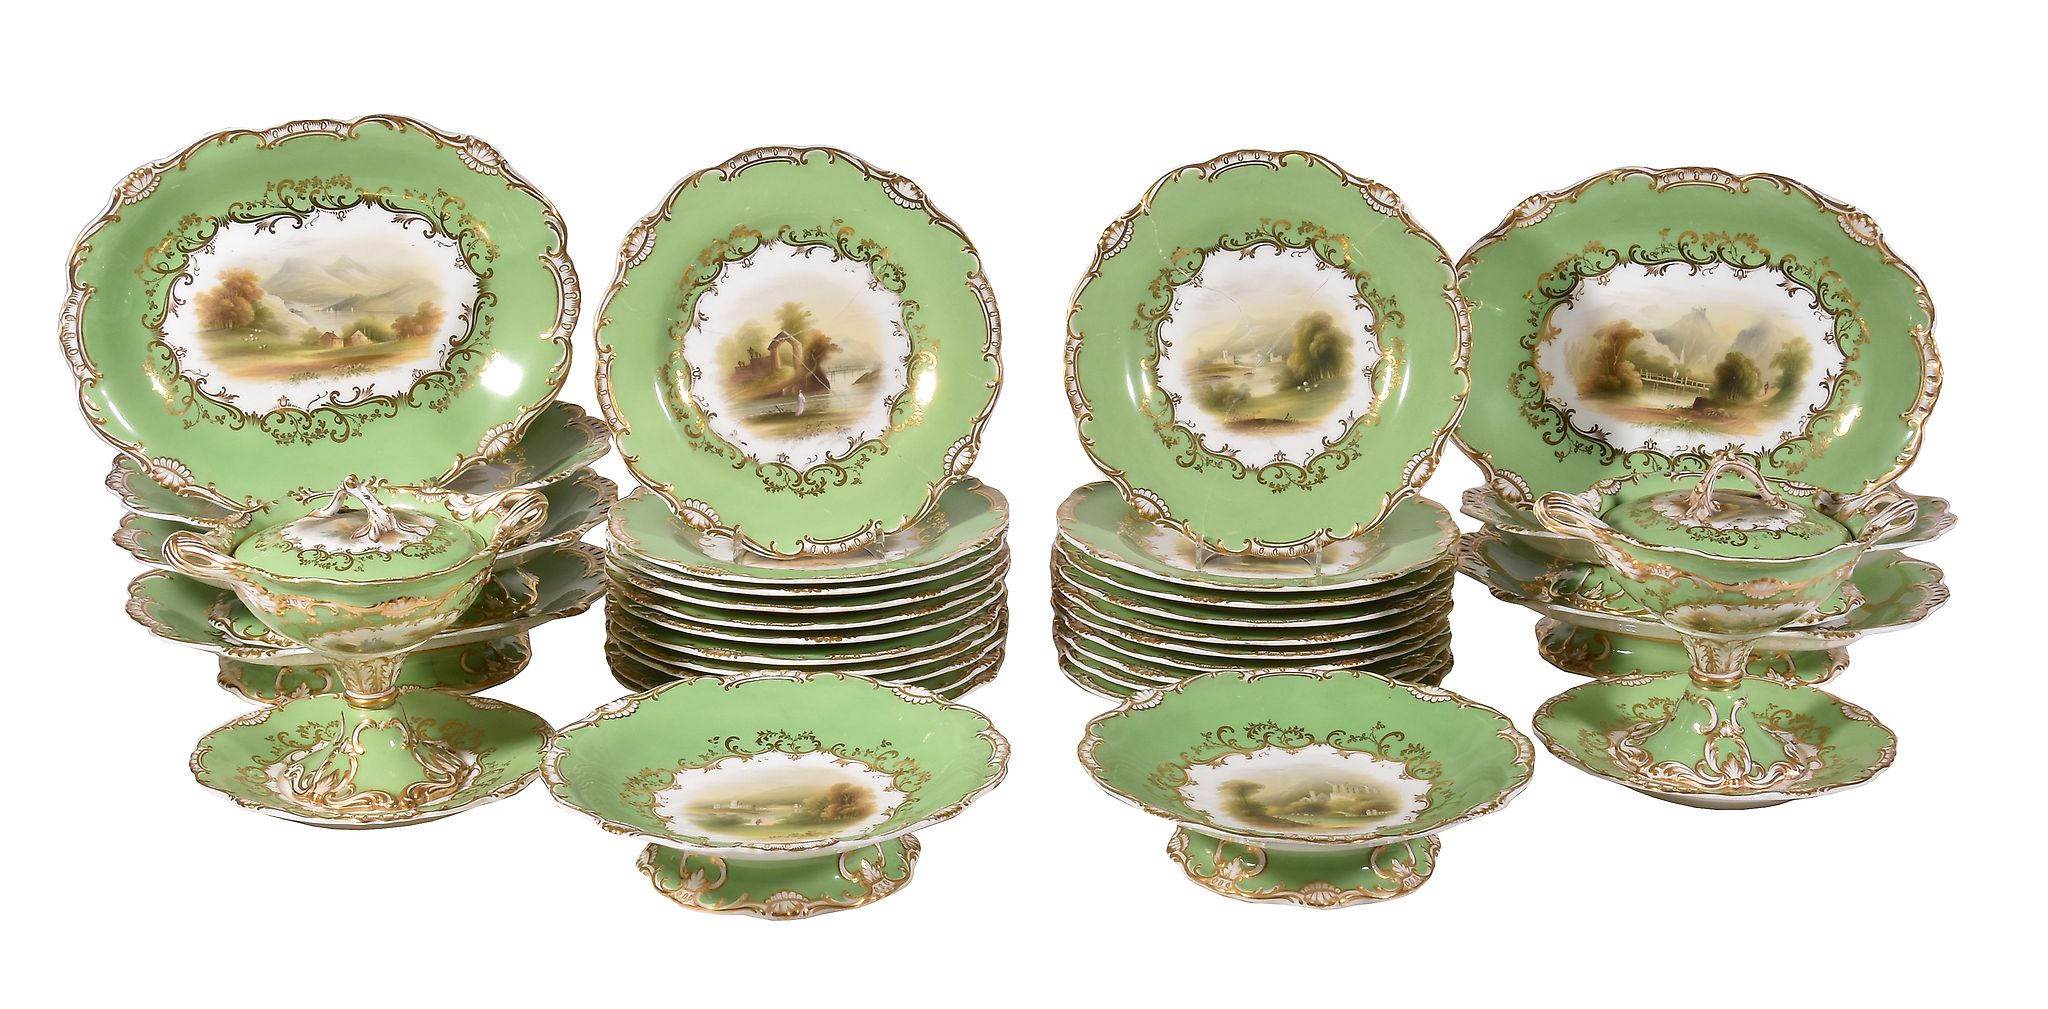 An English porcelain 'Rococo revival' lime-green ground part dessert service, circa 1840, painted